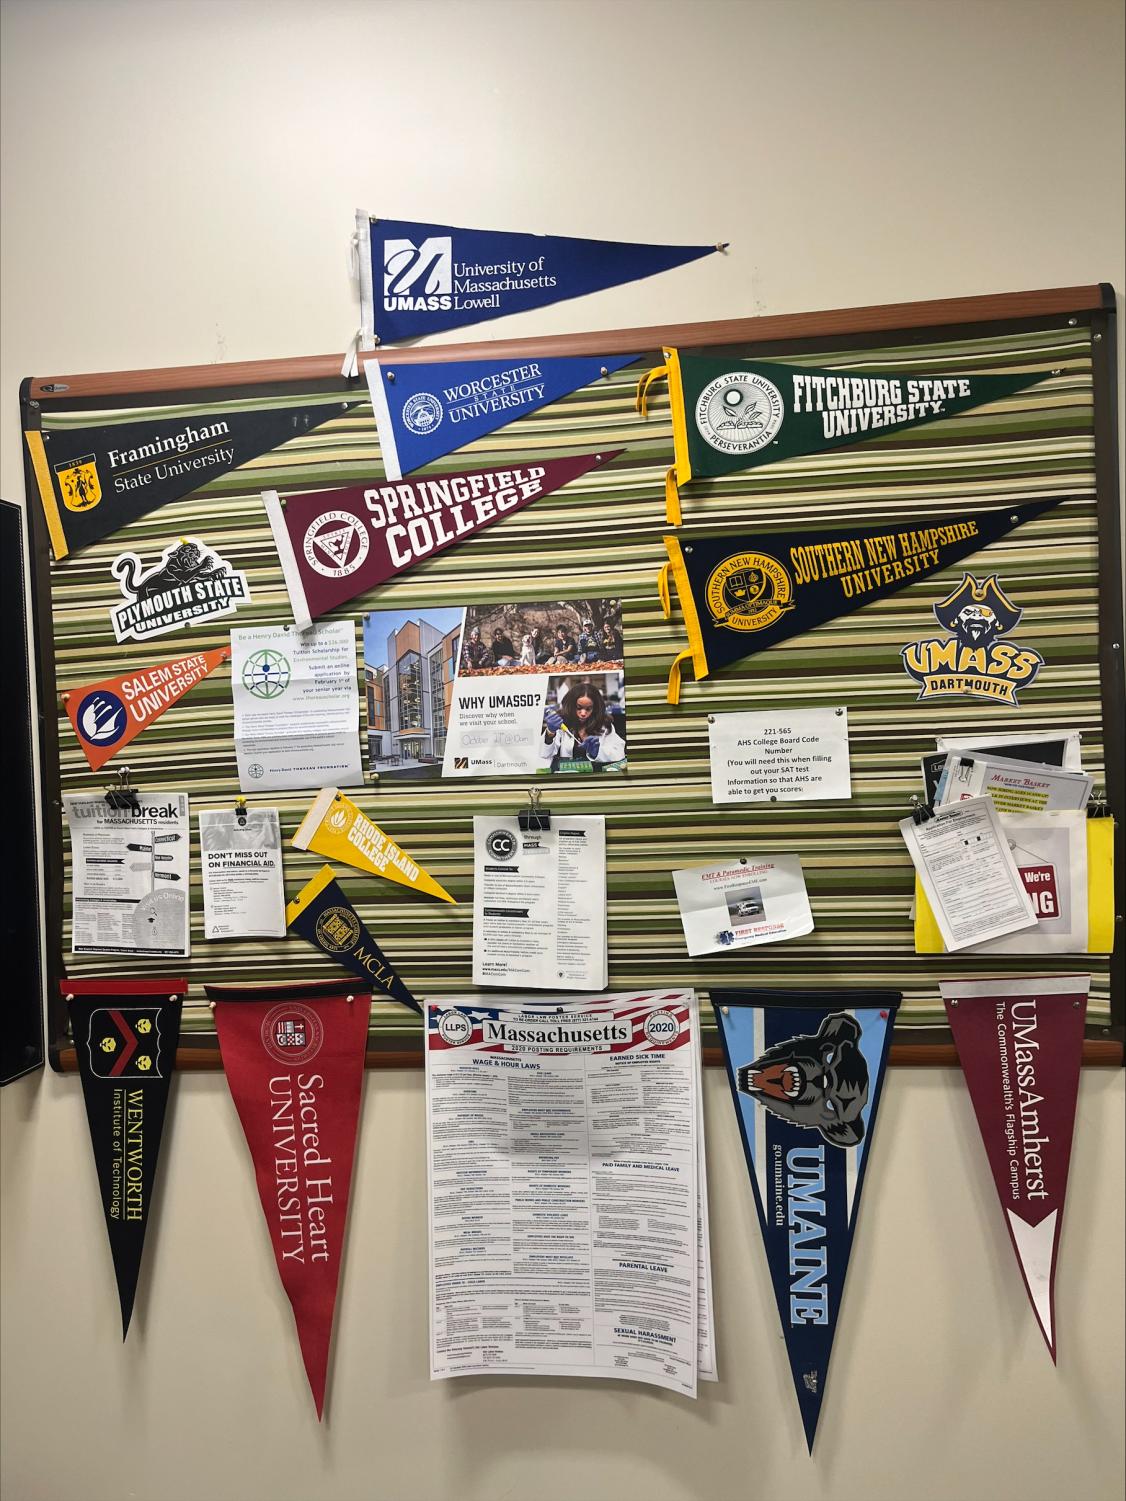 AHS Guidance Office advertises college choices for students